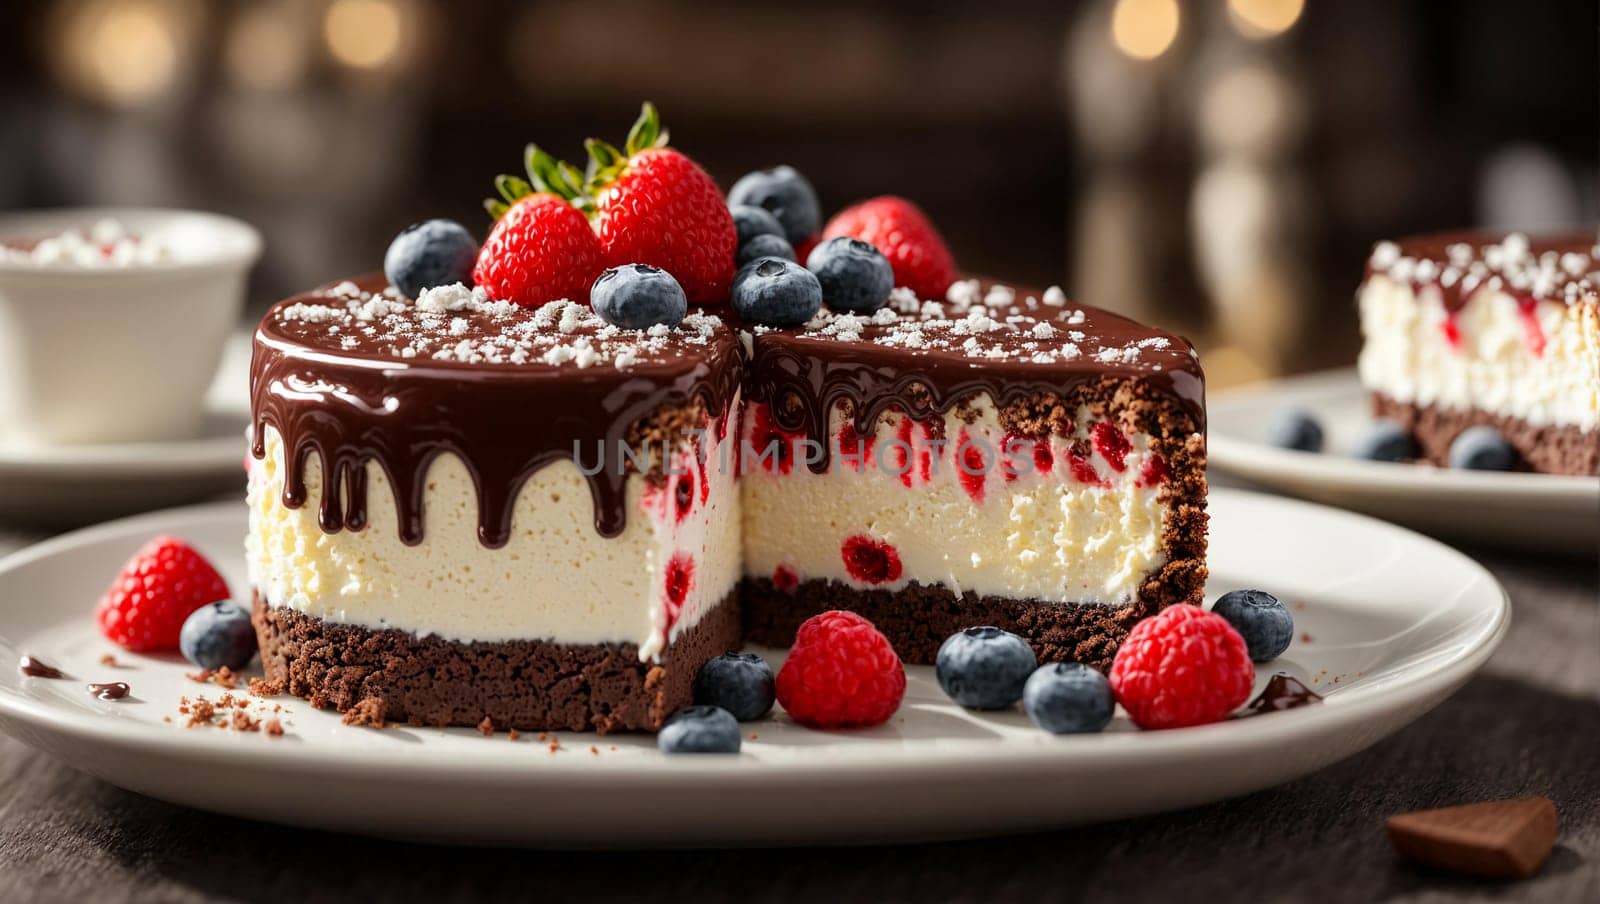 Chocolate cheesecakes with cream sauce and berry filling on a plate, bright and luminous image